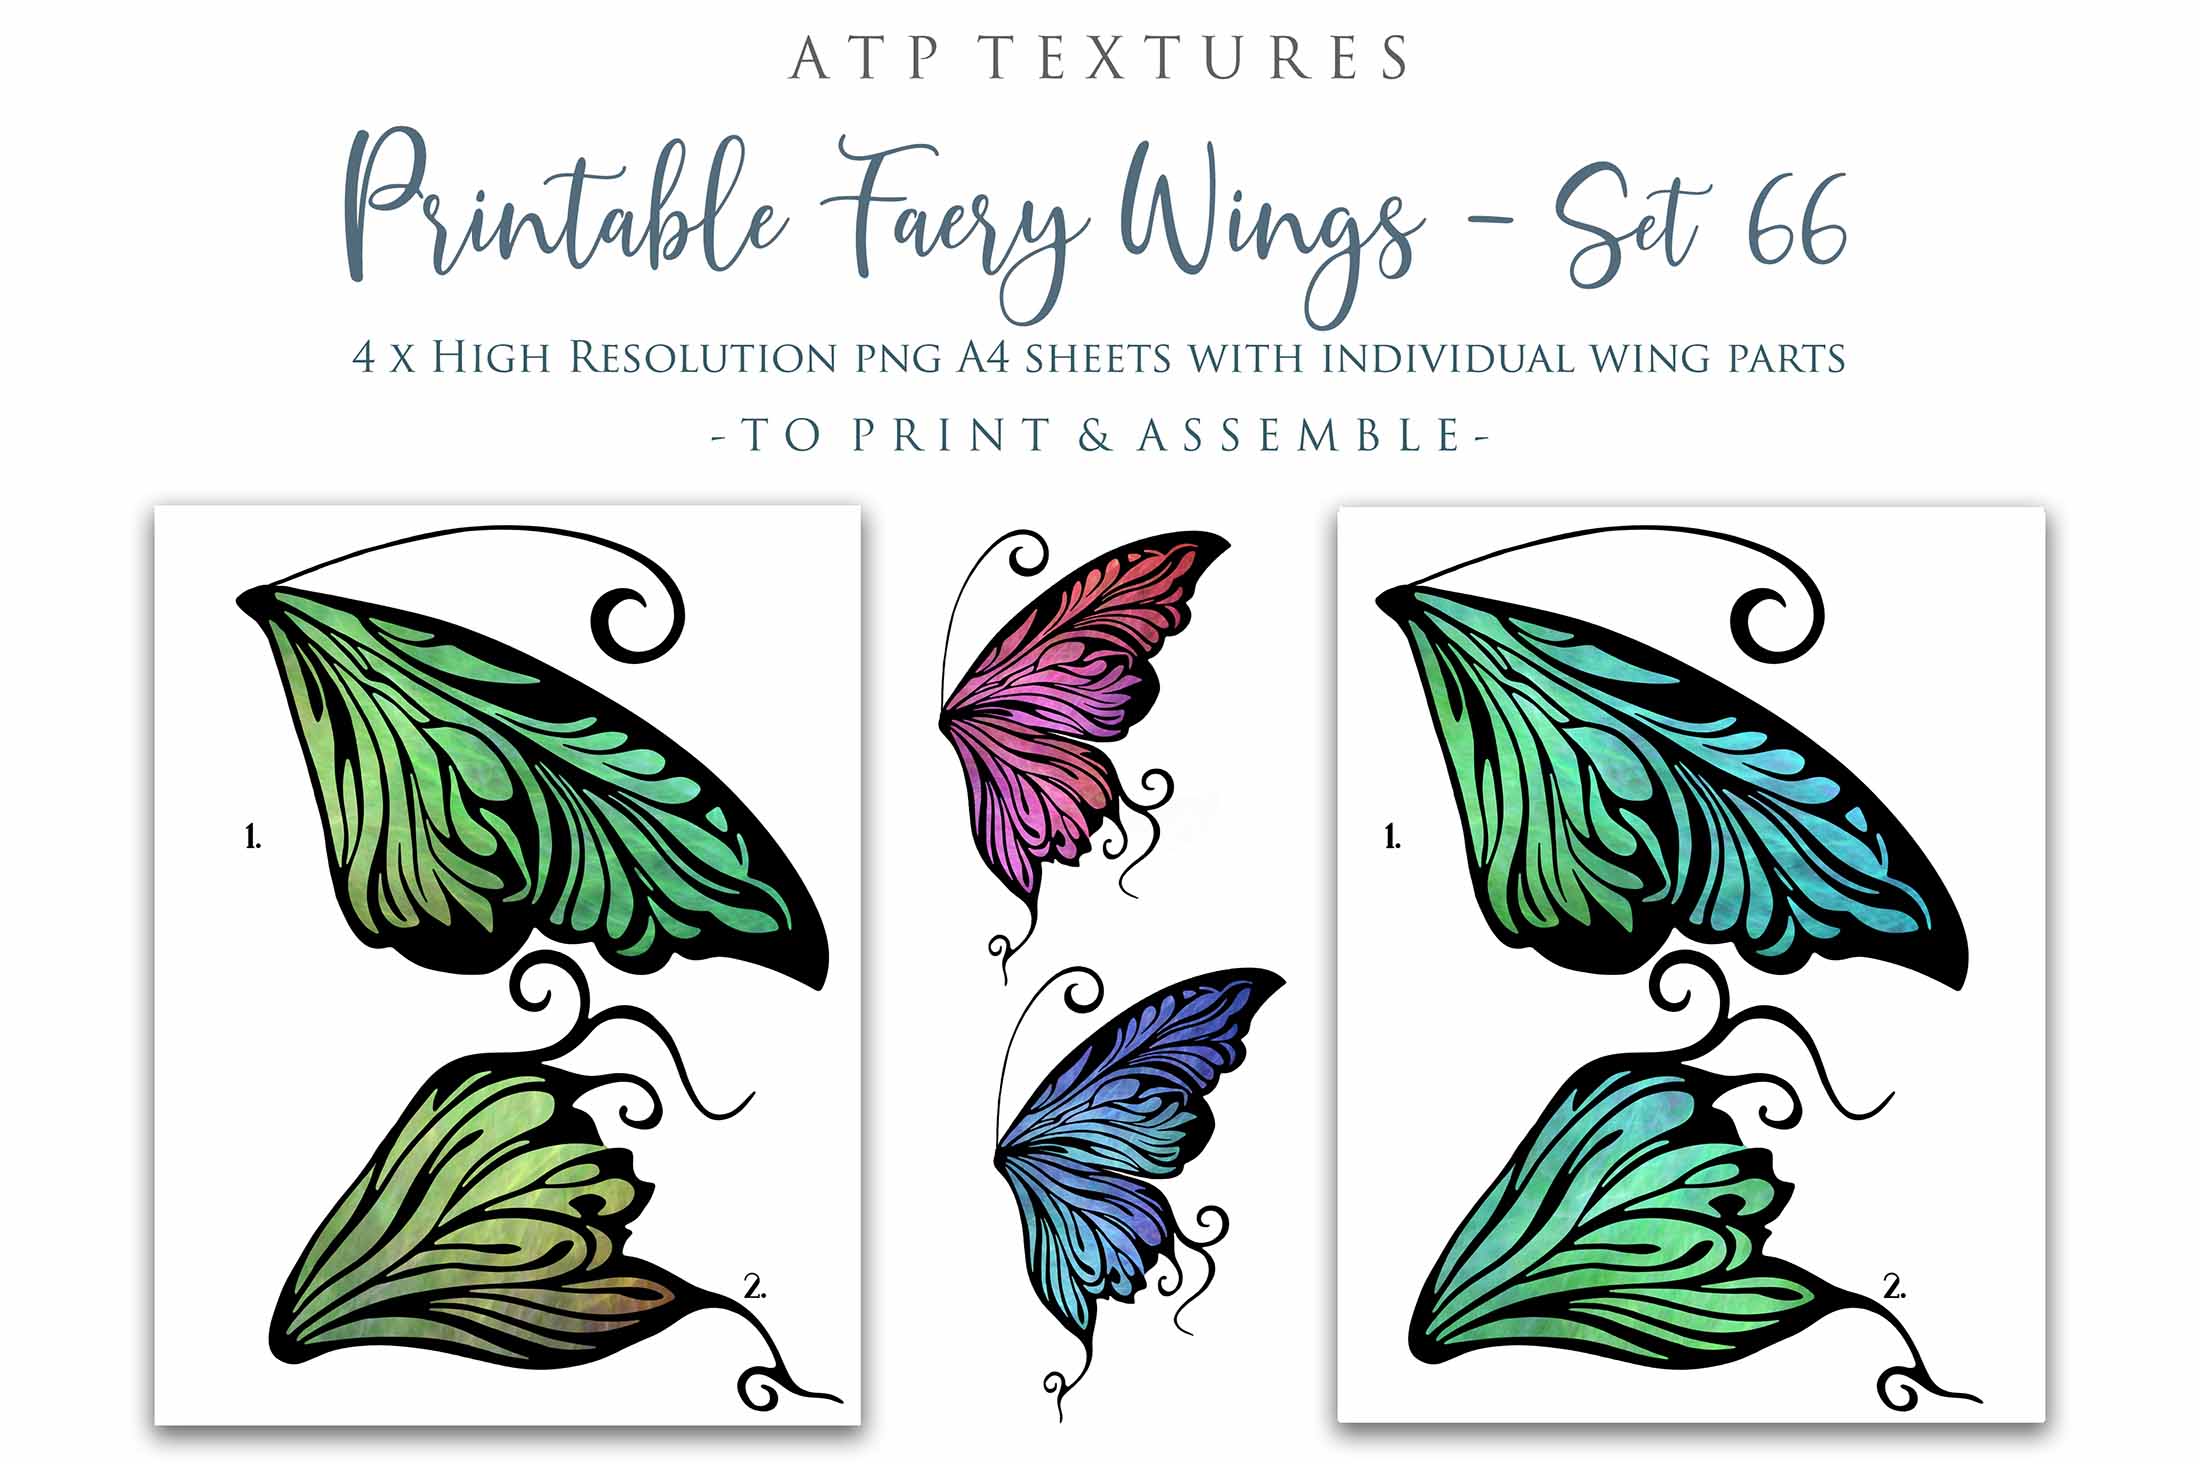 Printable Fairy Wings. For Art Dolls, Adults, Children. High resolution, png files. This is a digital product. Print and cut. Paper craft. Create fairy wing earrings or crown jewelry from these designs. Fairycore, Halloween, Diy Crafting Costume.